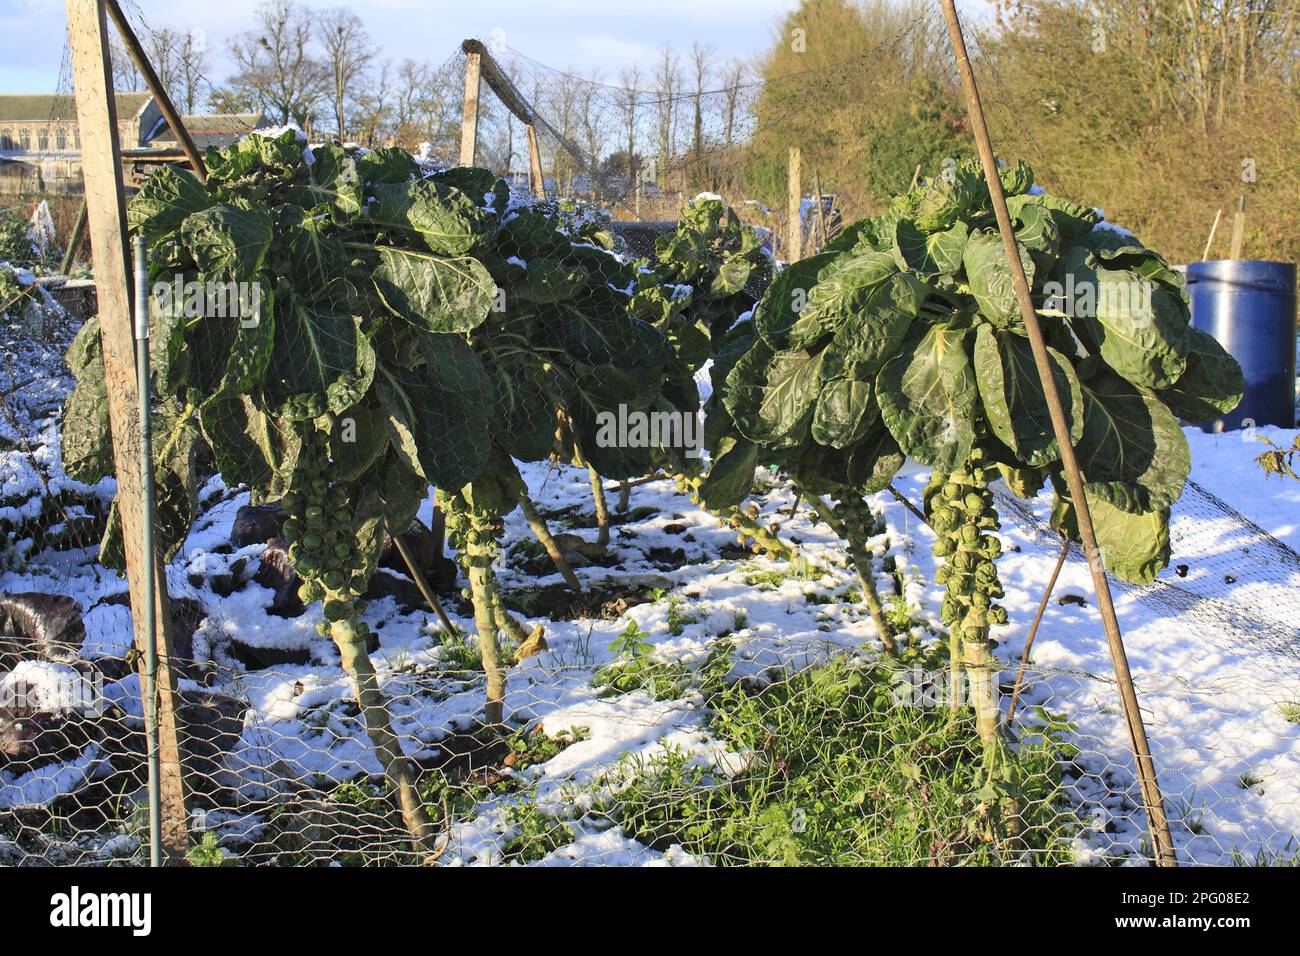 Brussels Sprout (Brassica oleracea) crop, in snow covered village allotments, Bacton, Suffolk, England, United Kingdom Stock Photo